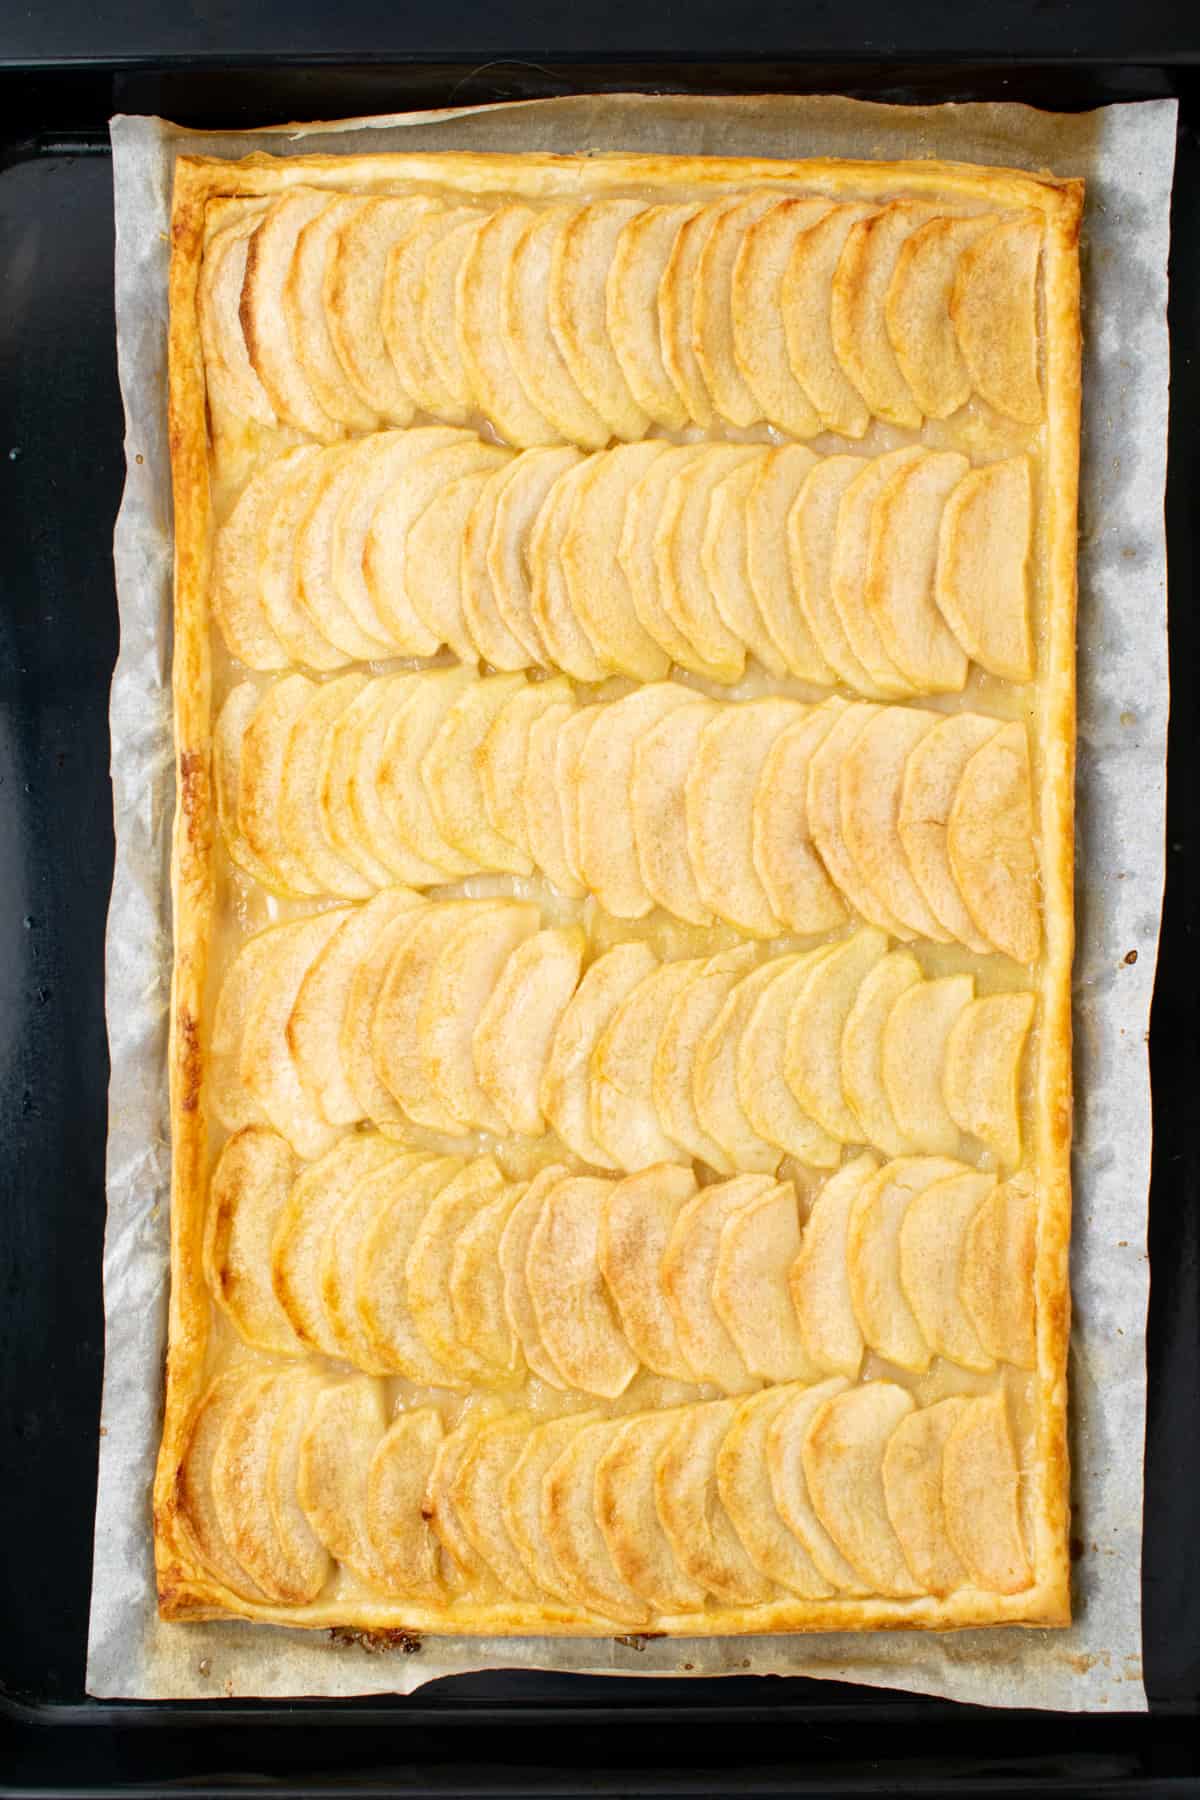 A baked apple tart with golden brown pastry.